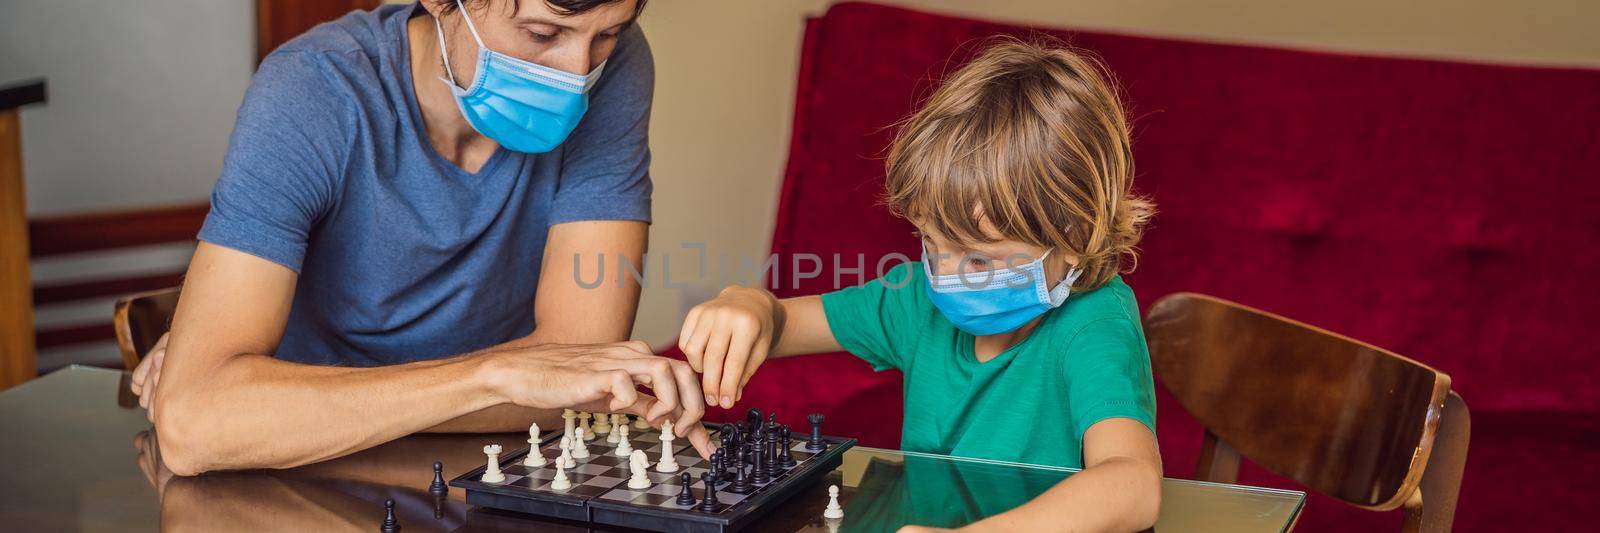 Happy Family Playing Board Game At Home. Stay at home due to quarantine. Coronovirus infection BANNER, LONG FORMAT by galitskaya